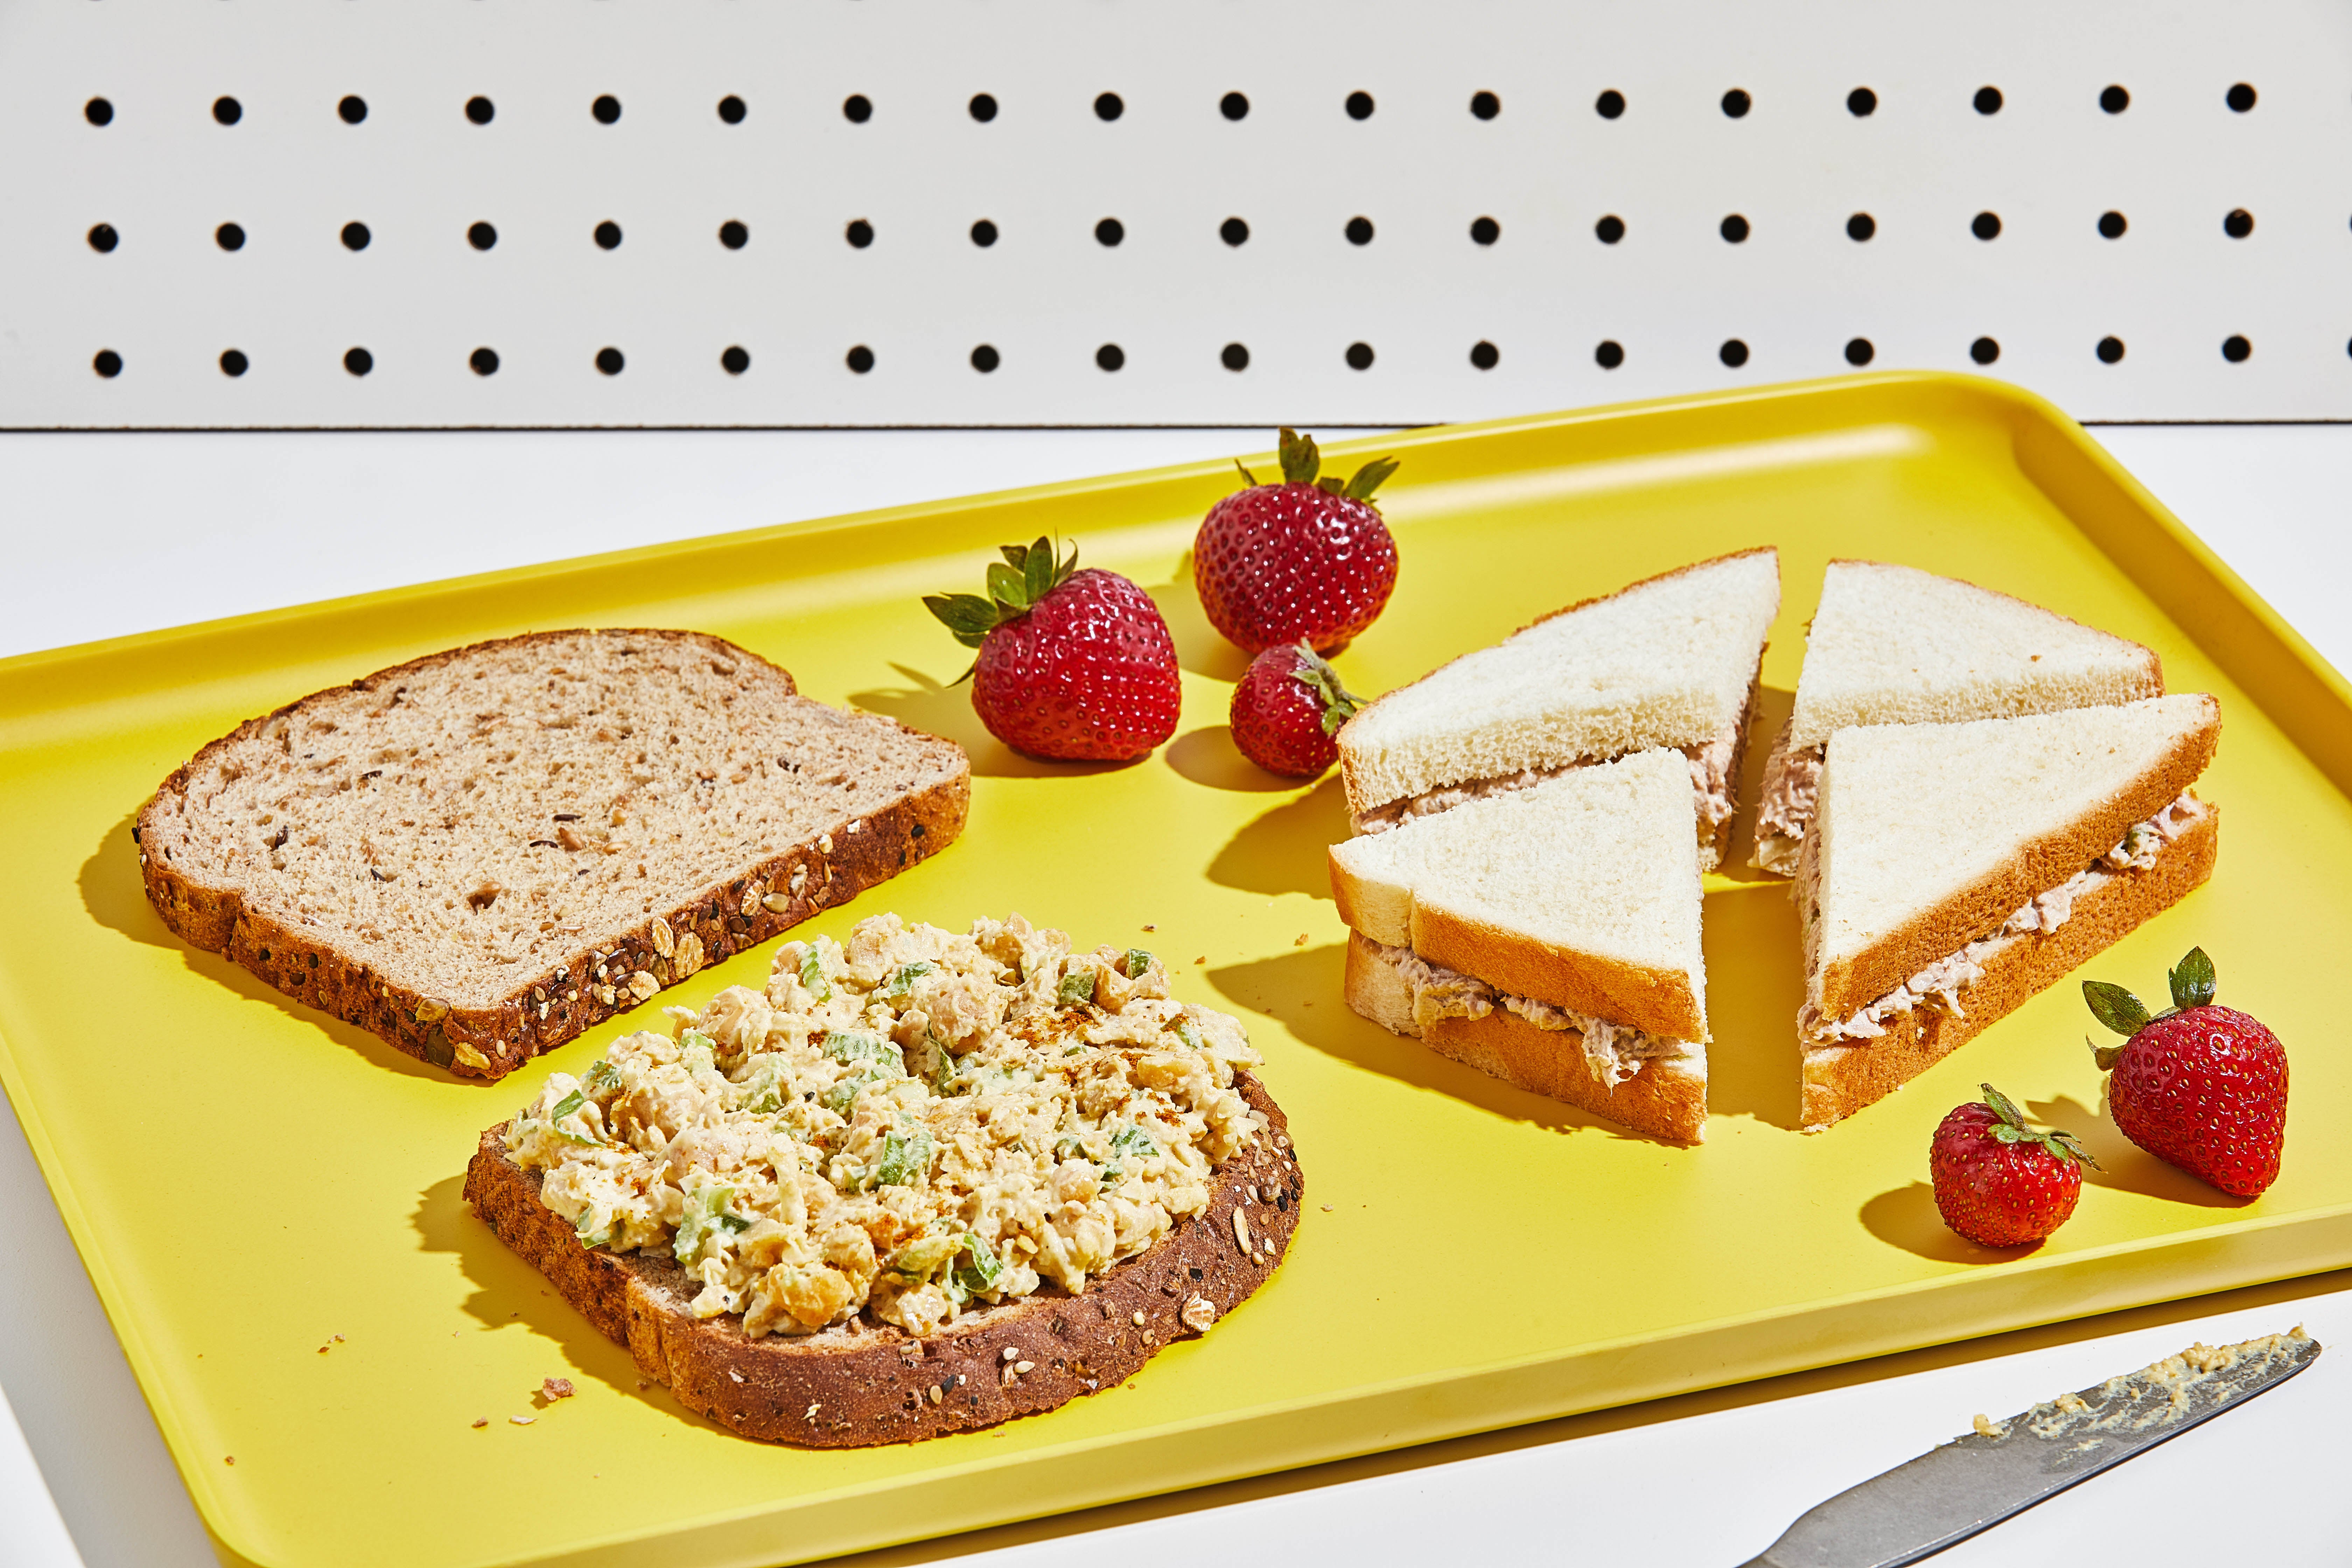 The classic ‘deli’ sandwich still has a place in your lunch box